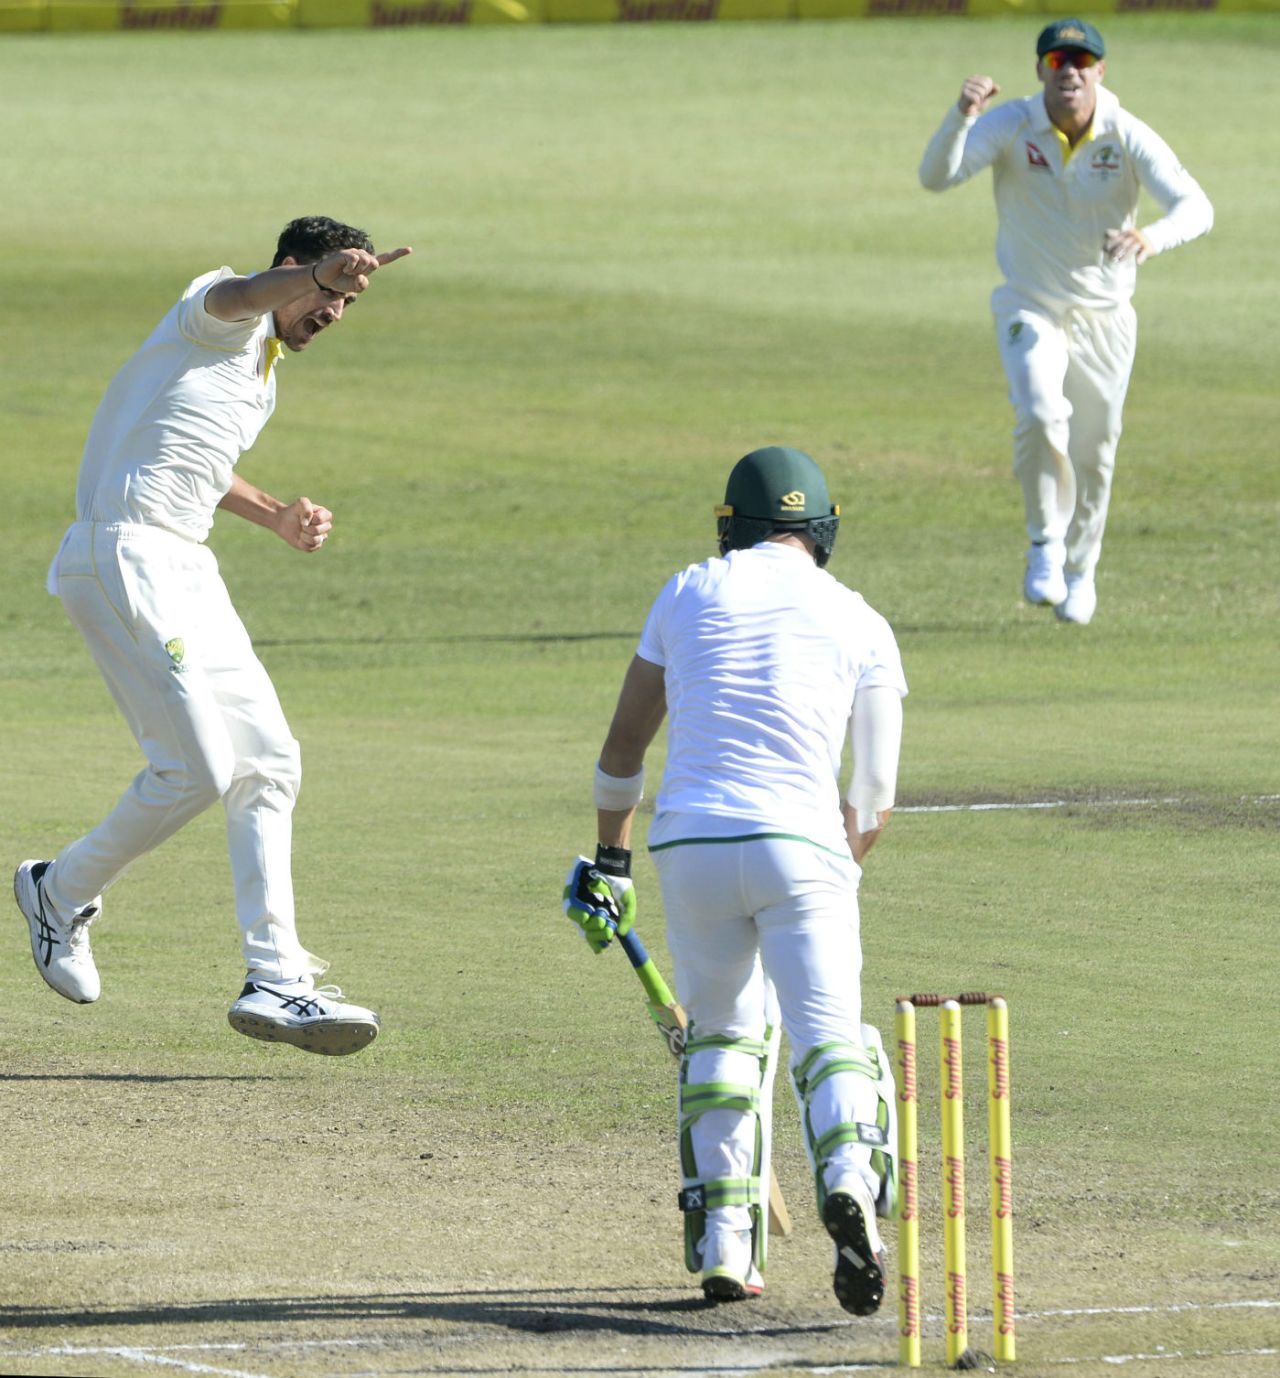 Mitchell Starc removed Faf du Plessis, South Africa v Australia, 1st Test, Durban, 2nd day, March 2, 2018